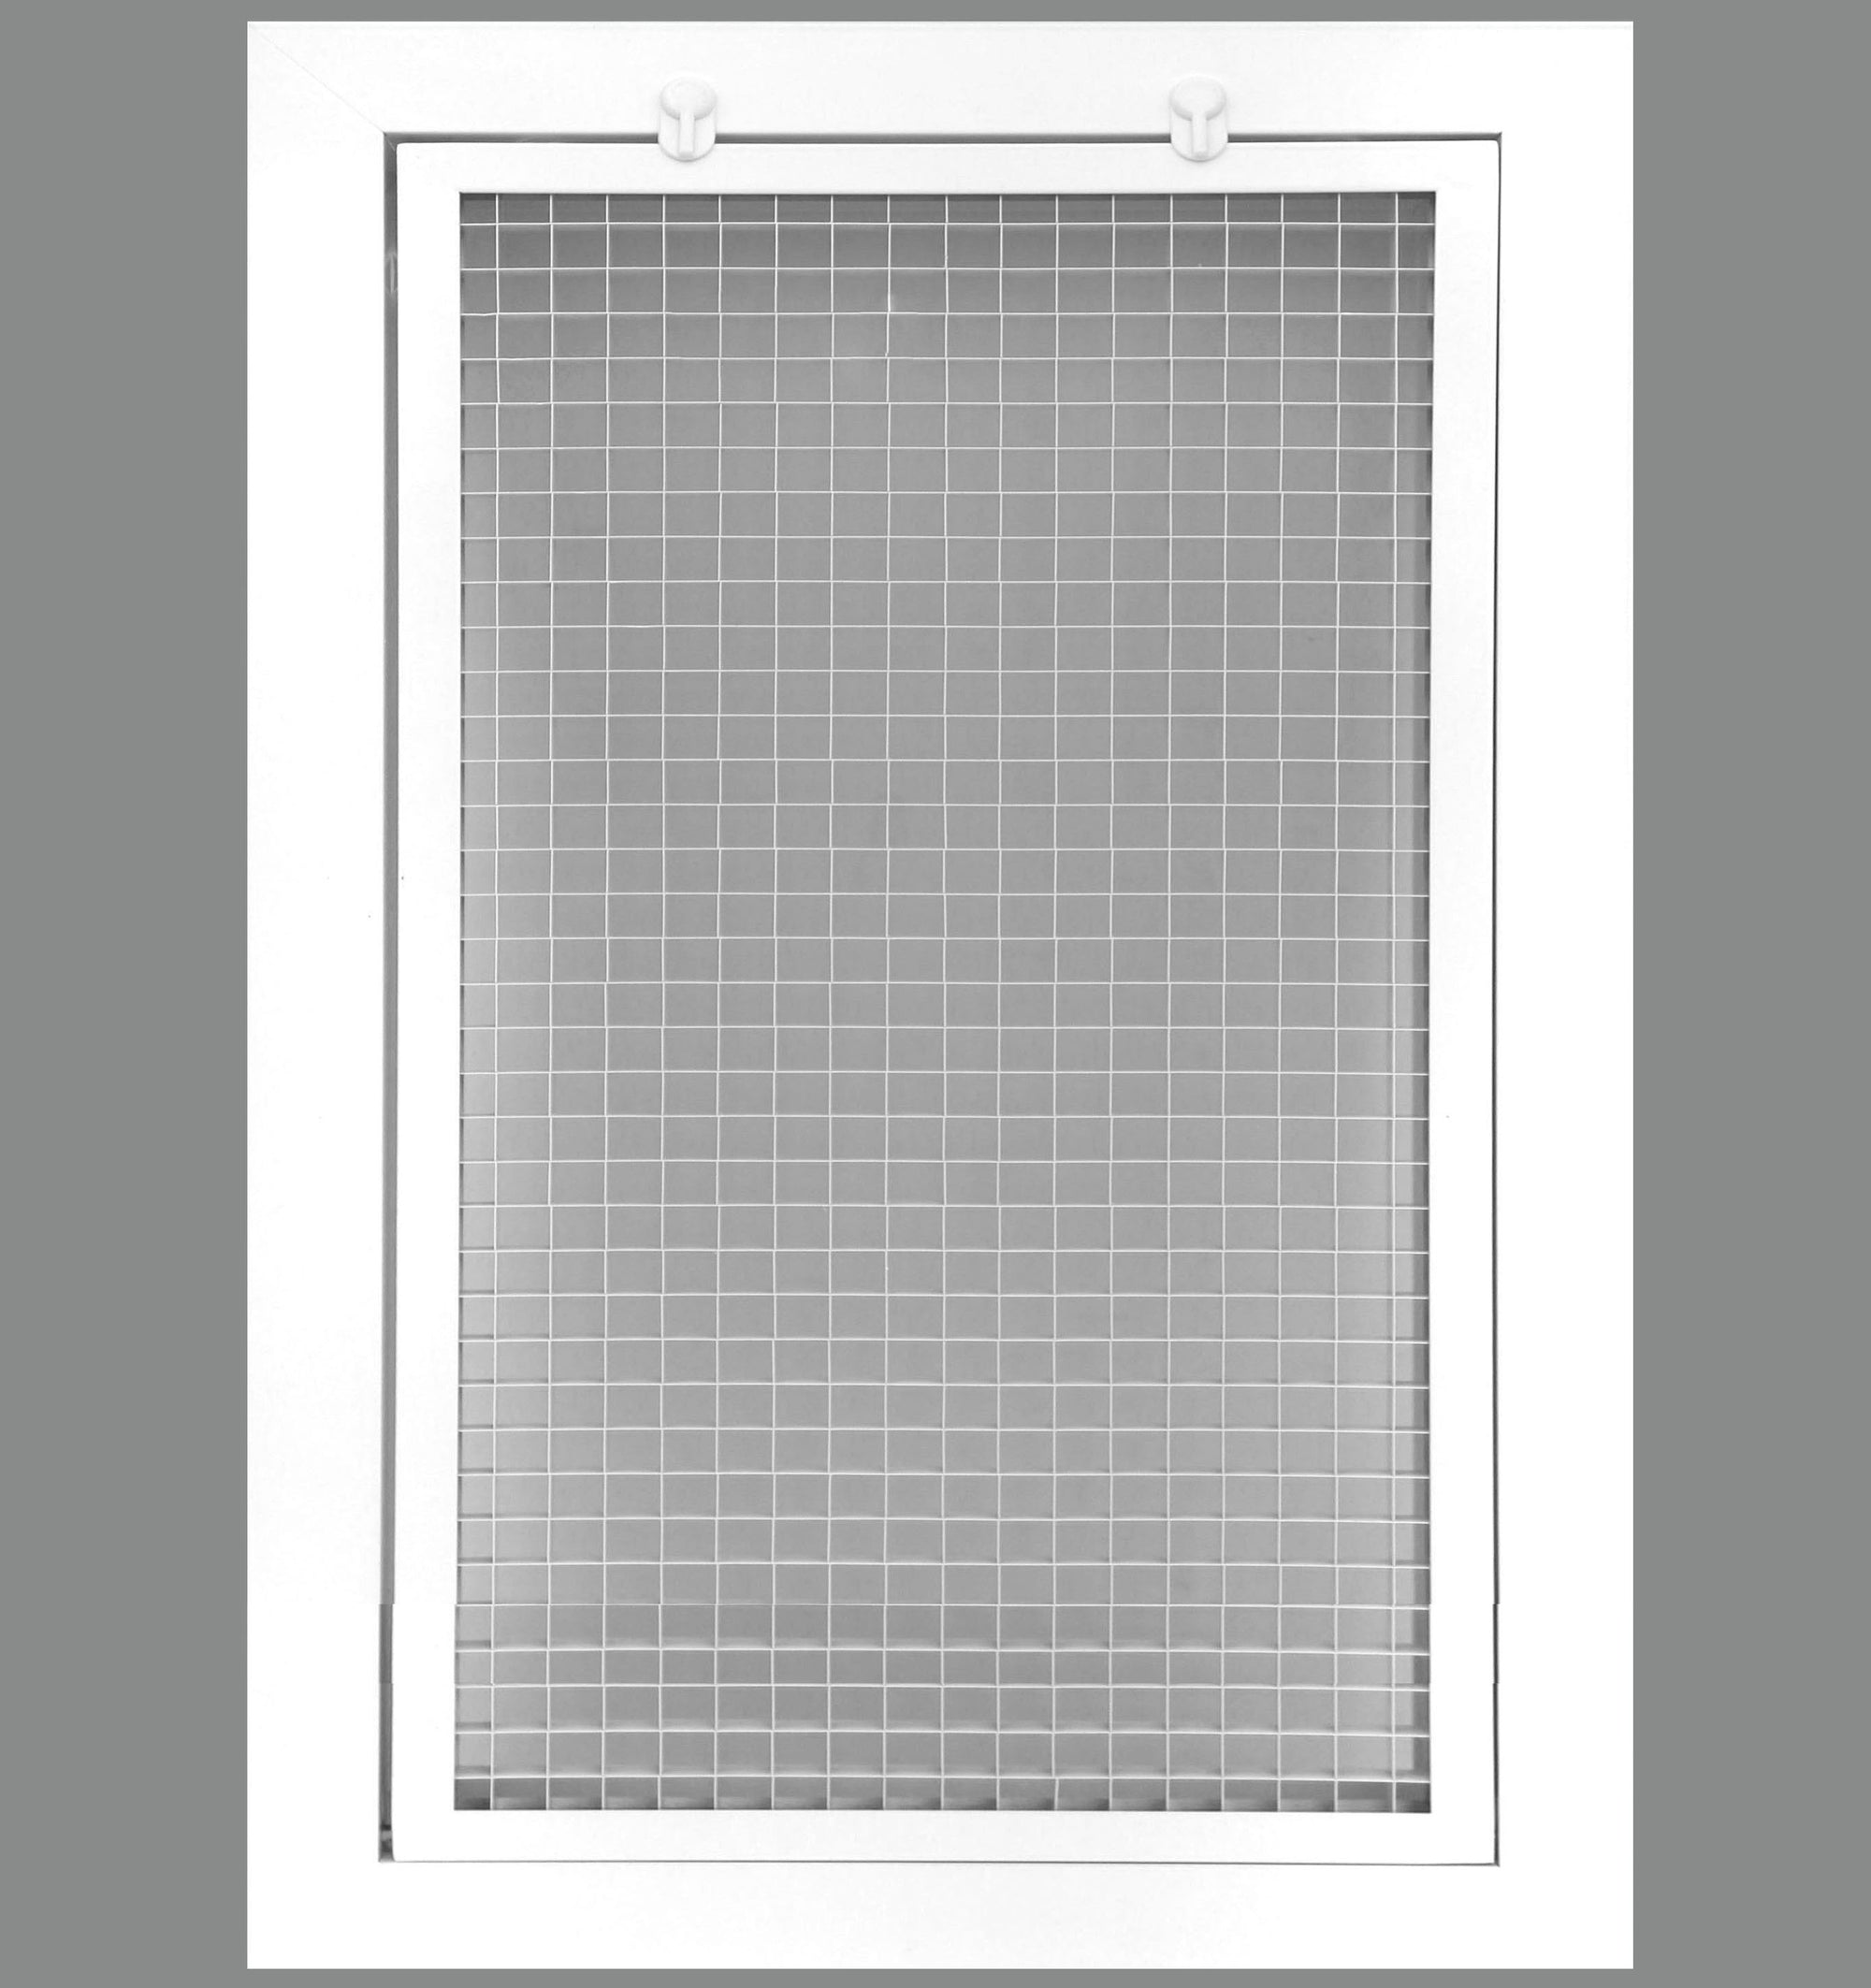 12" x 14" Cube Core Eggcrate Return Air Filter Grille for 1" Filter